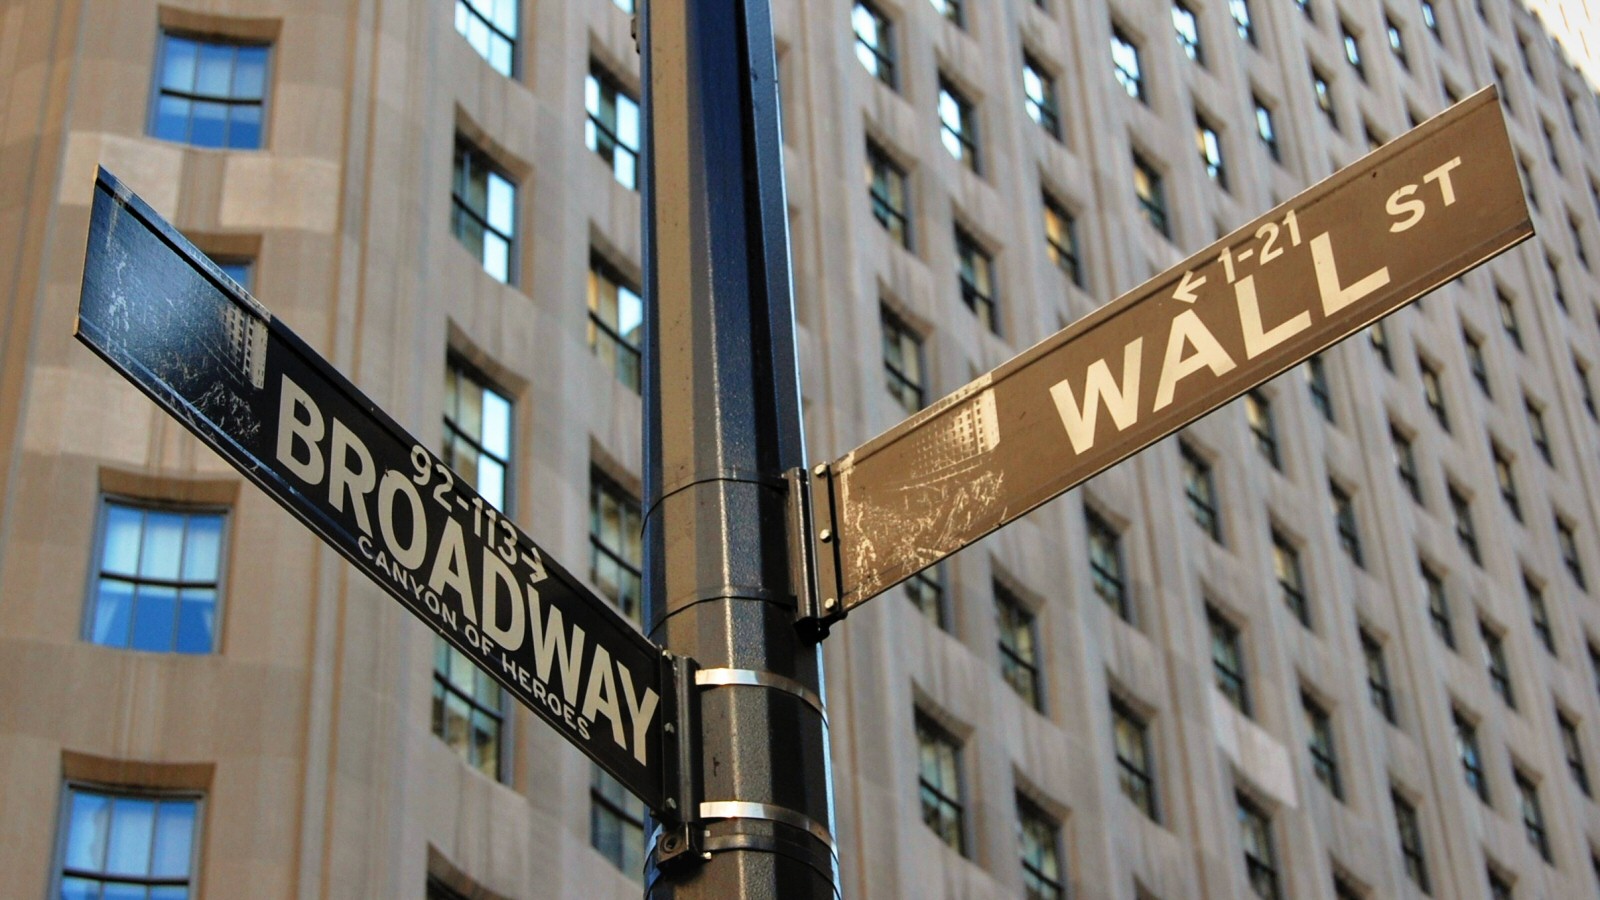 People called them 'Wall Street', but Melvin Capital is actually situated on Madison Ave.